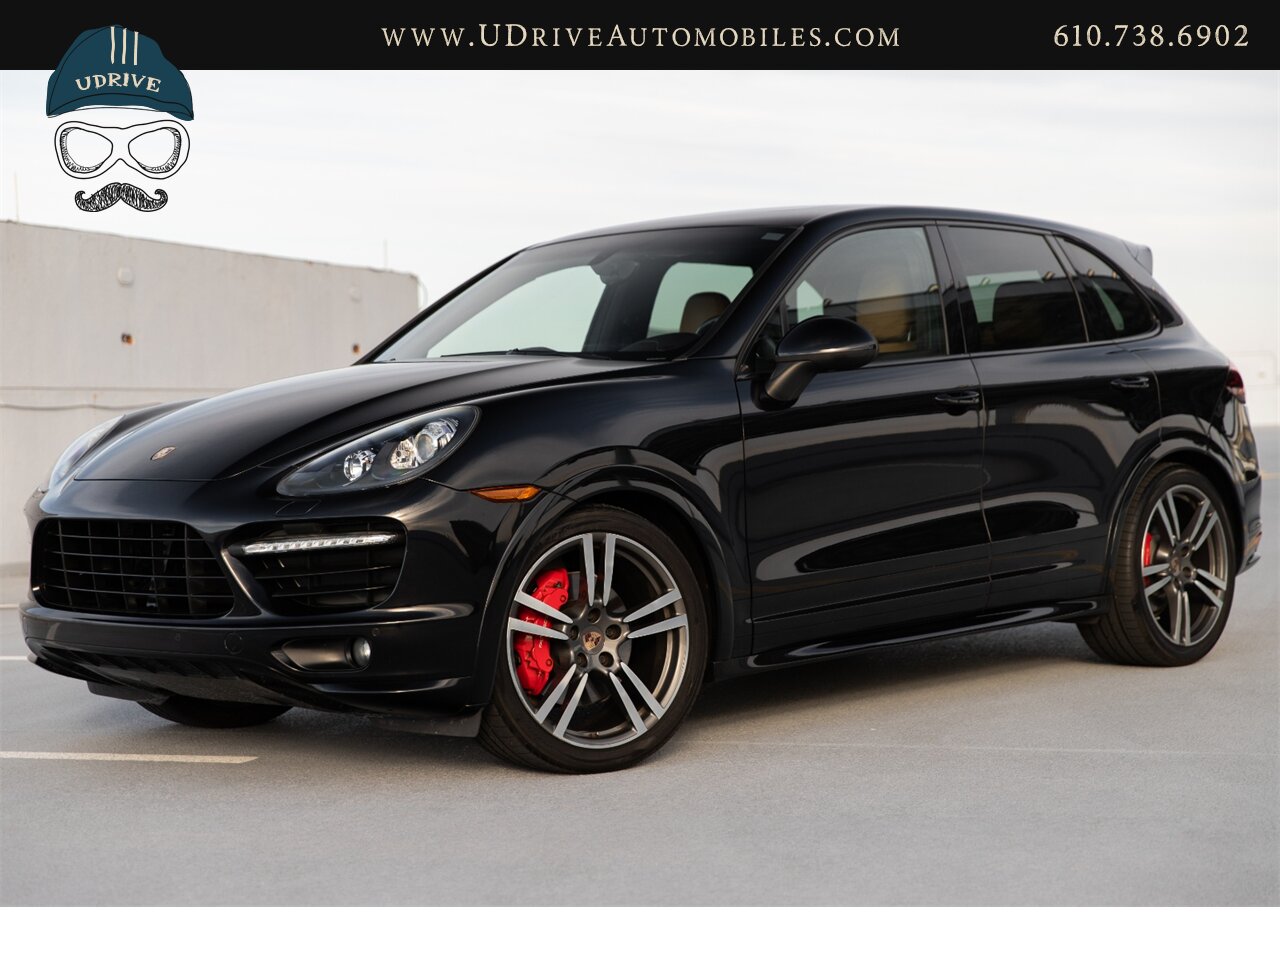 2013 Porsche Cayenne GTS Service History 1 Owner 21in Wheels  Espresso / Cognac Two Tone Leather - Photo 1 - West Chester, PA 19382